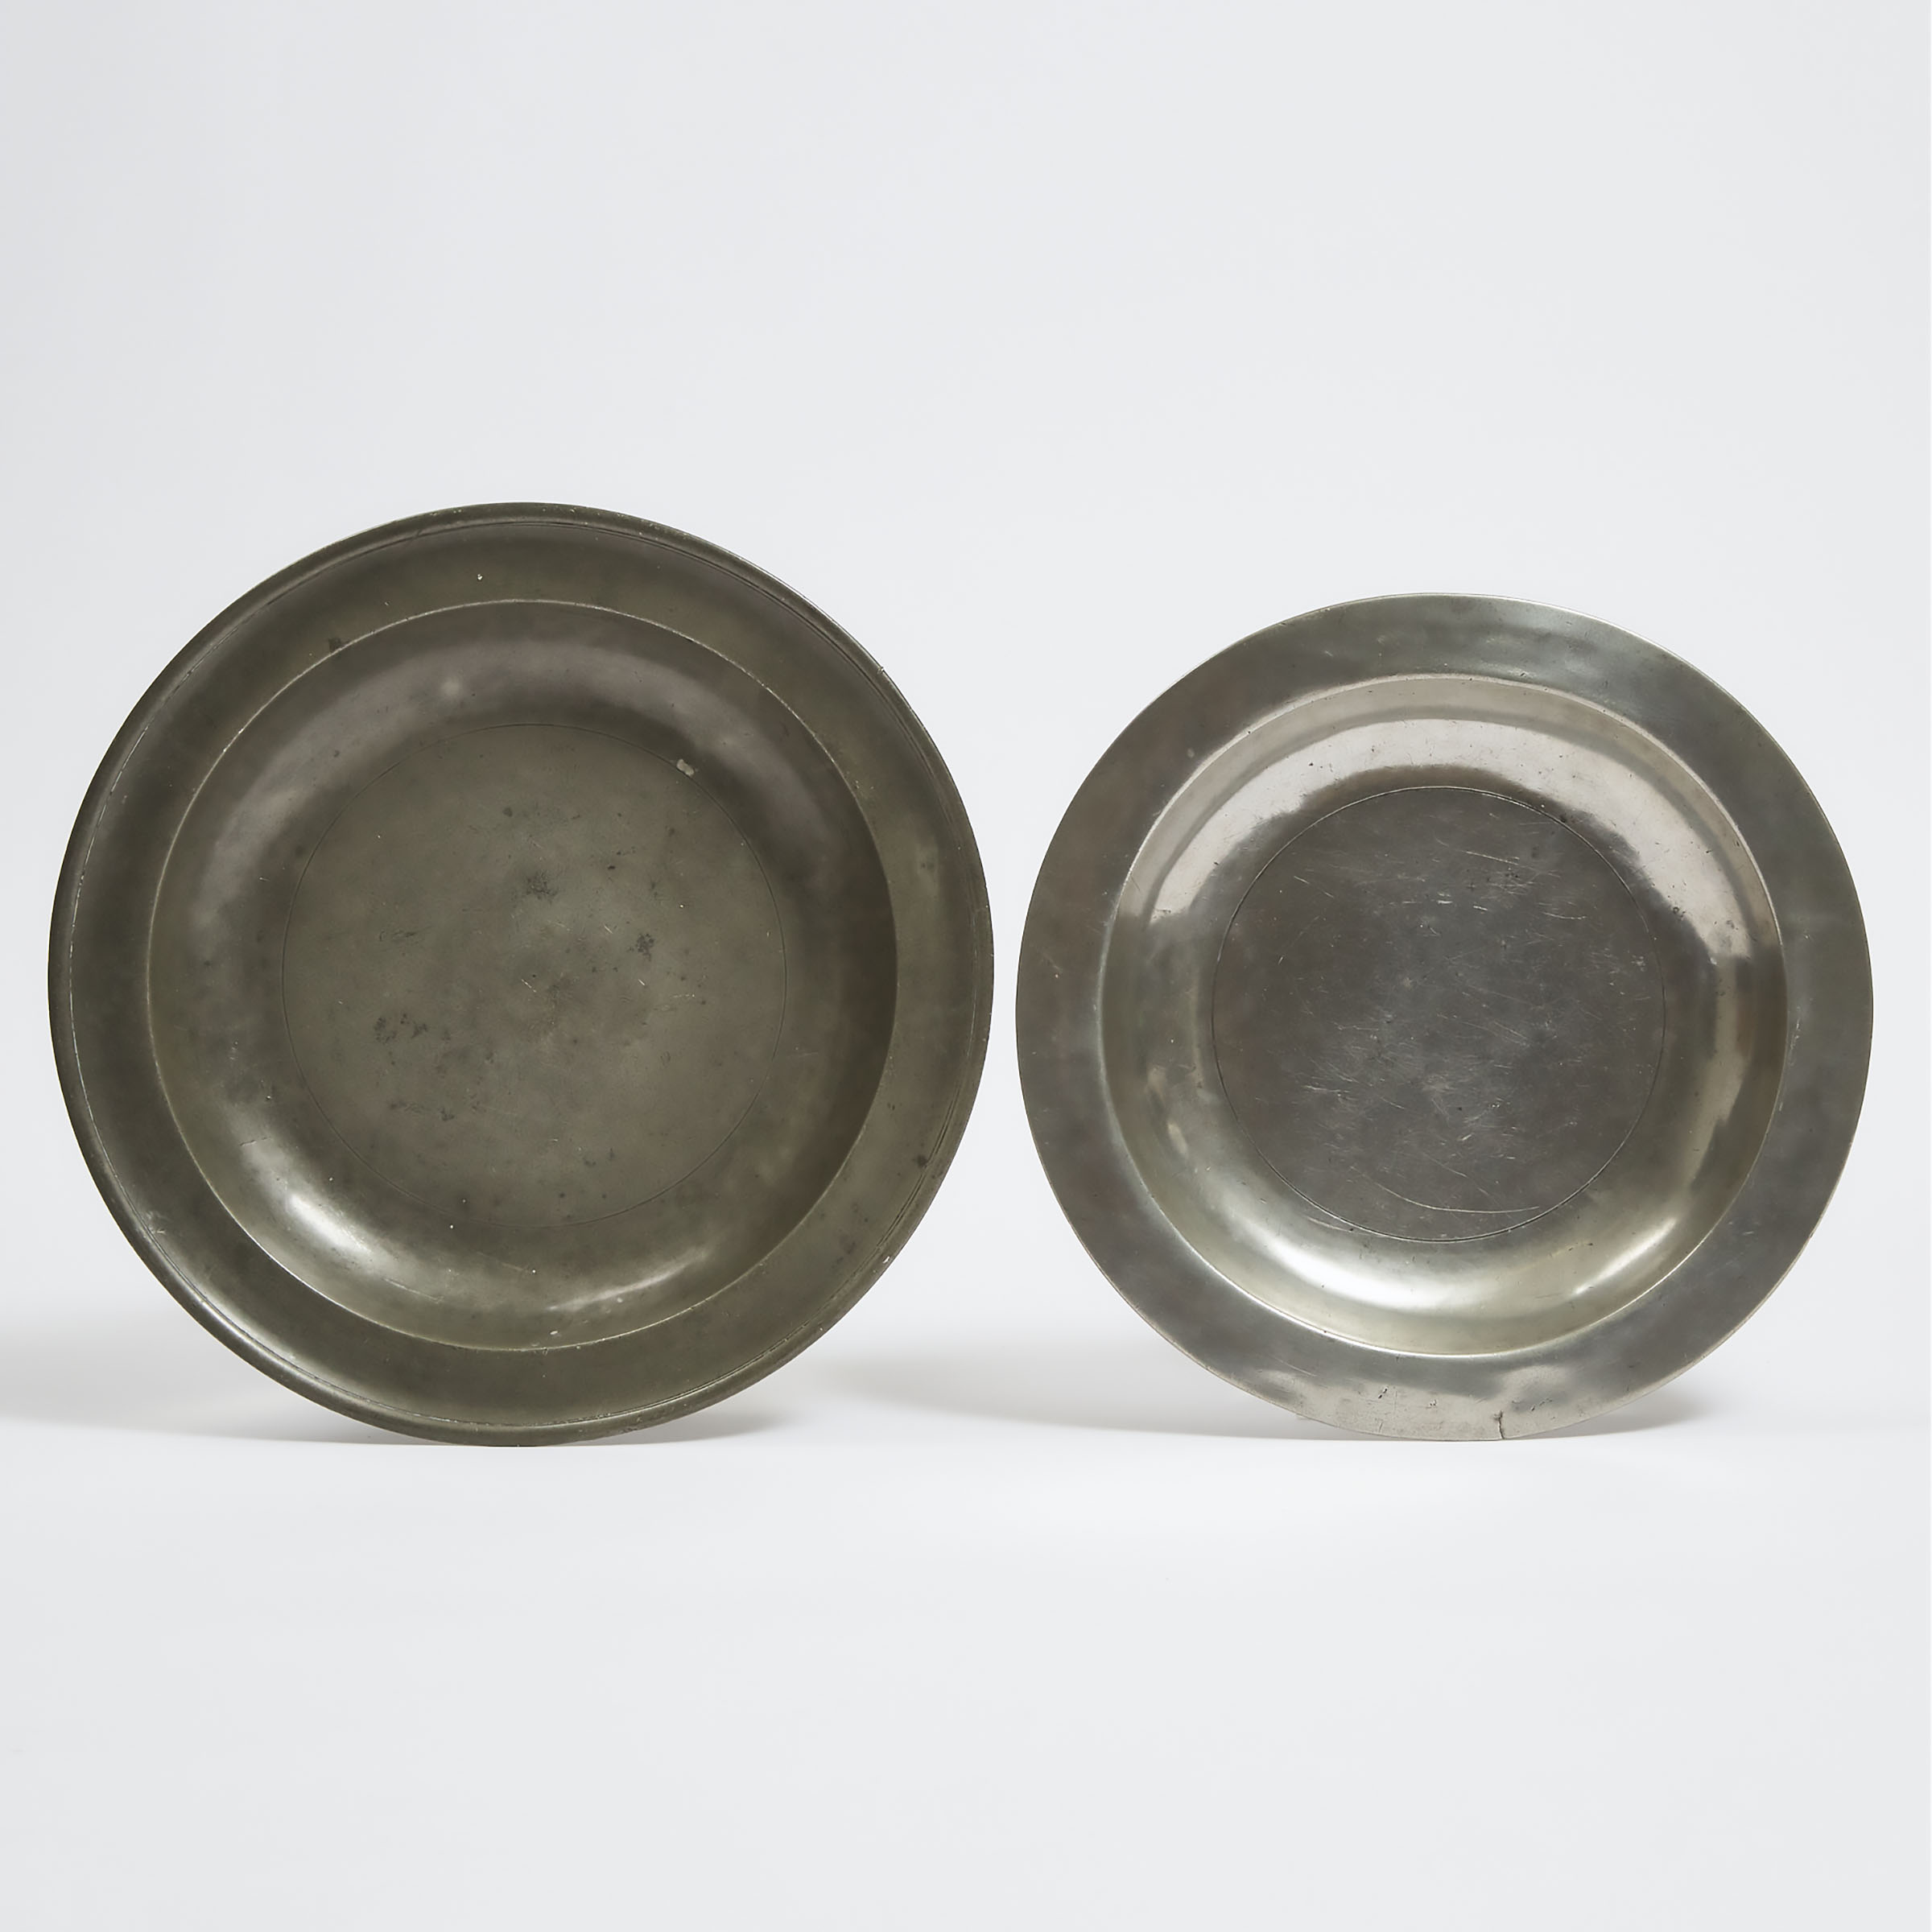 Two English Pewter Dishes, 17th